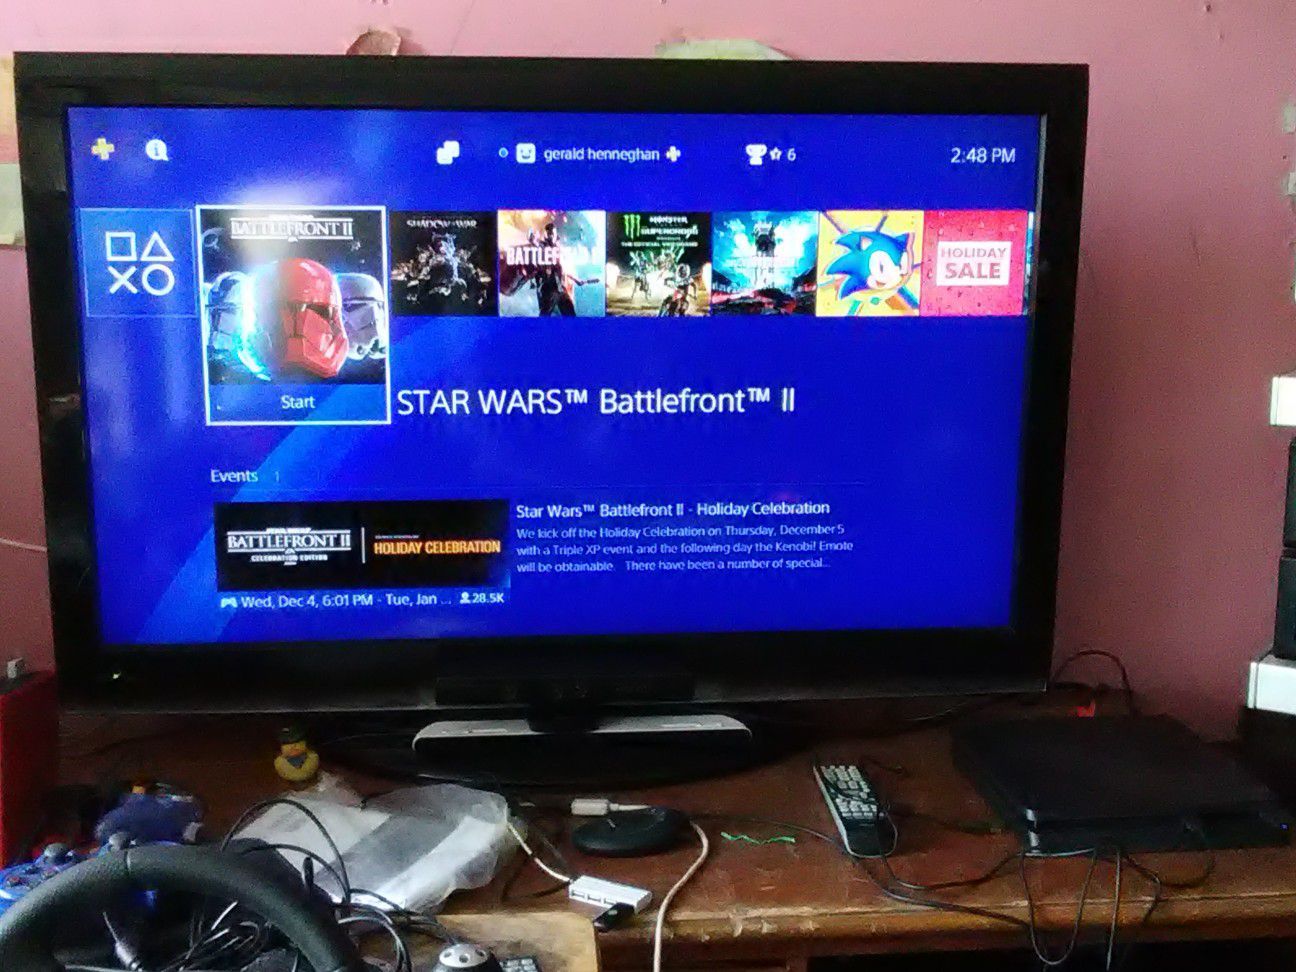 PS4 and PS3 with Sony 46inches TV with remote control and 4 HDMI ports